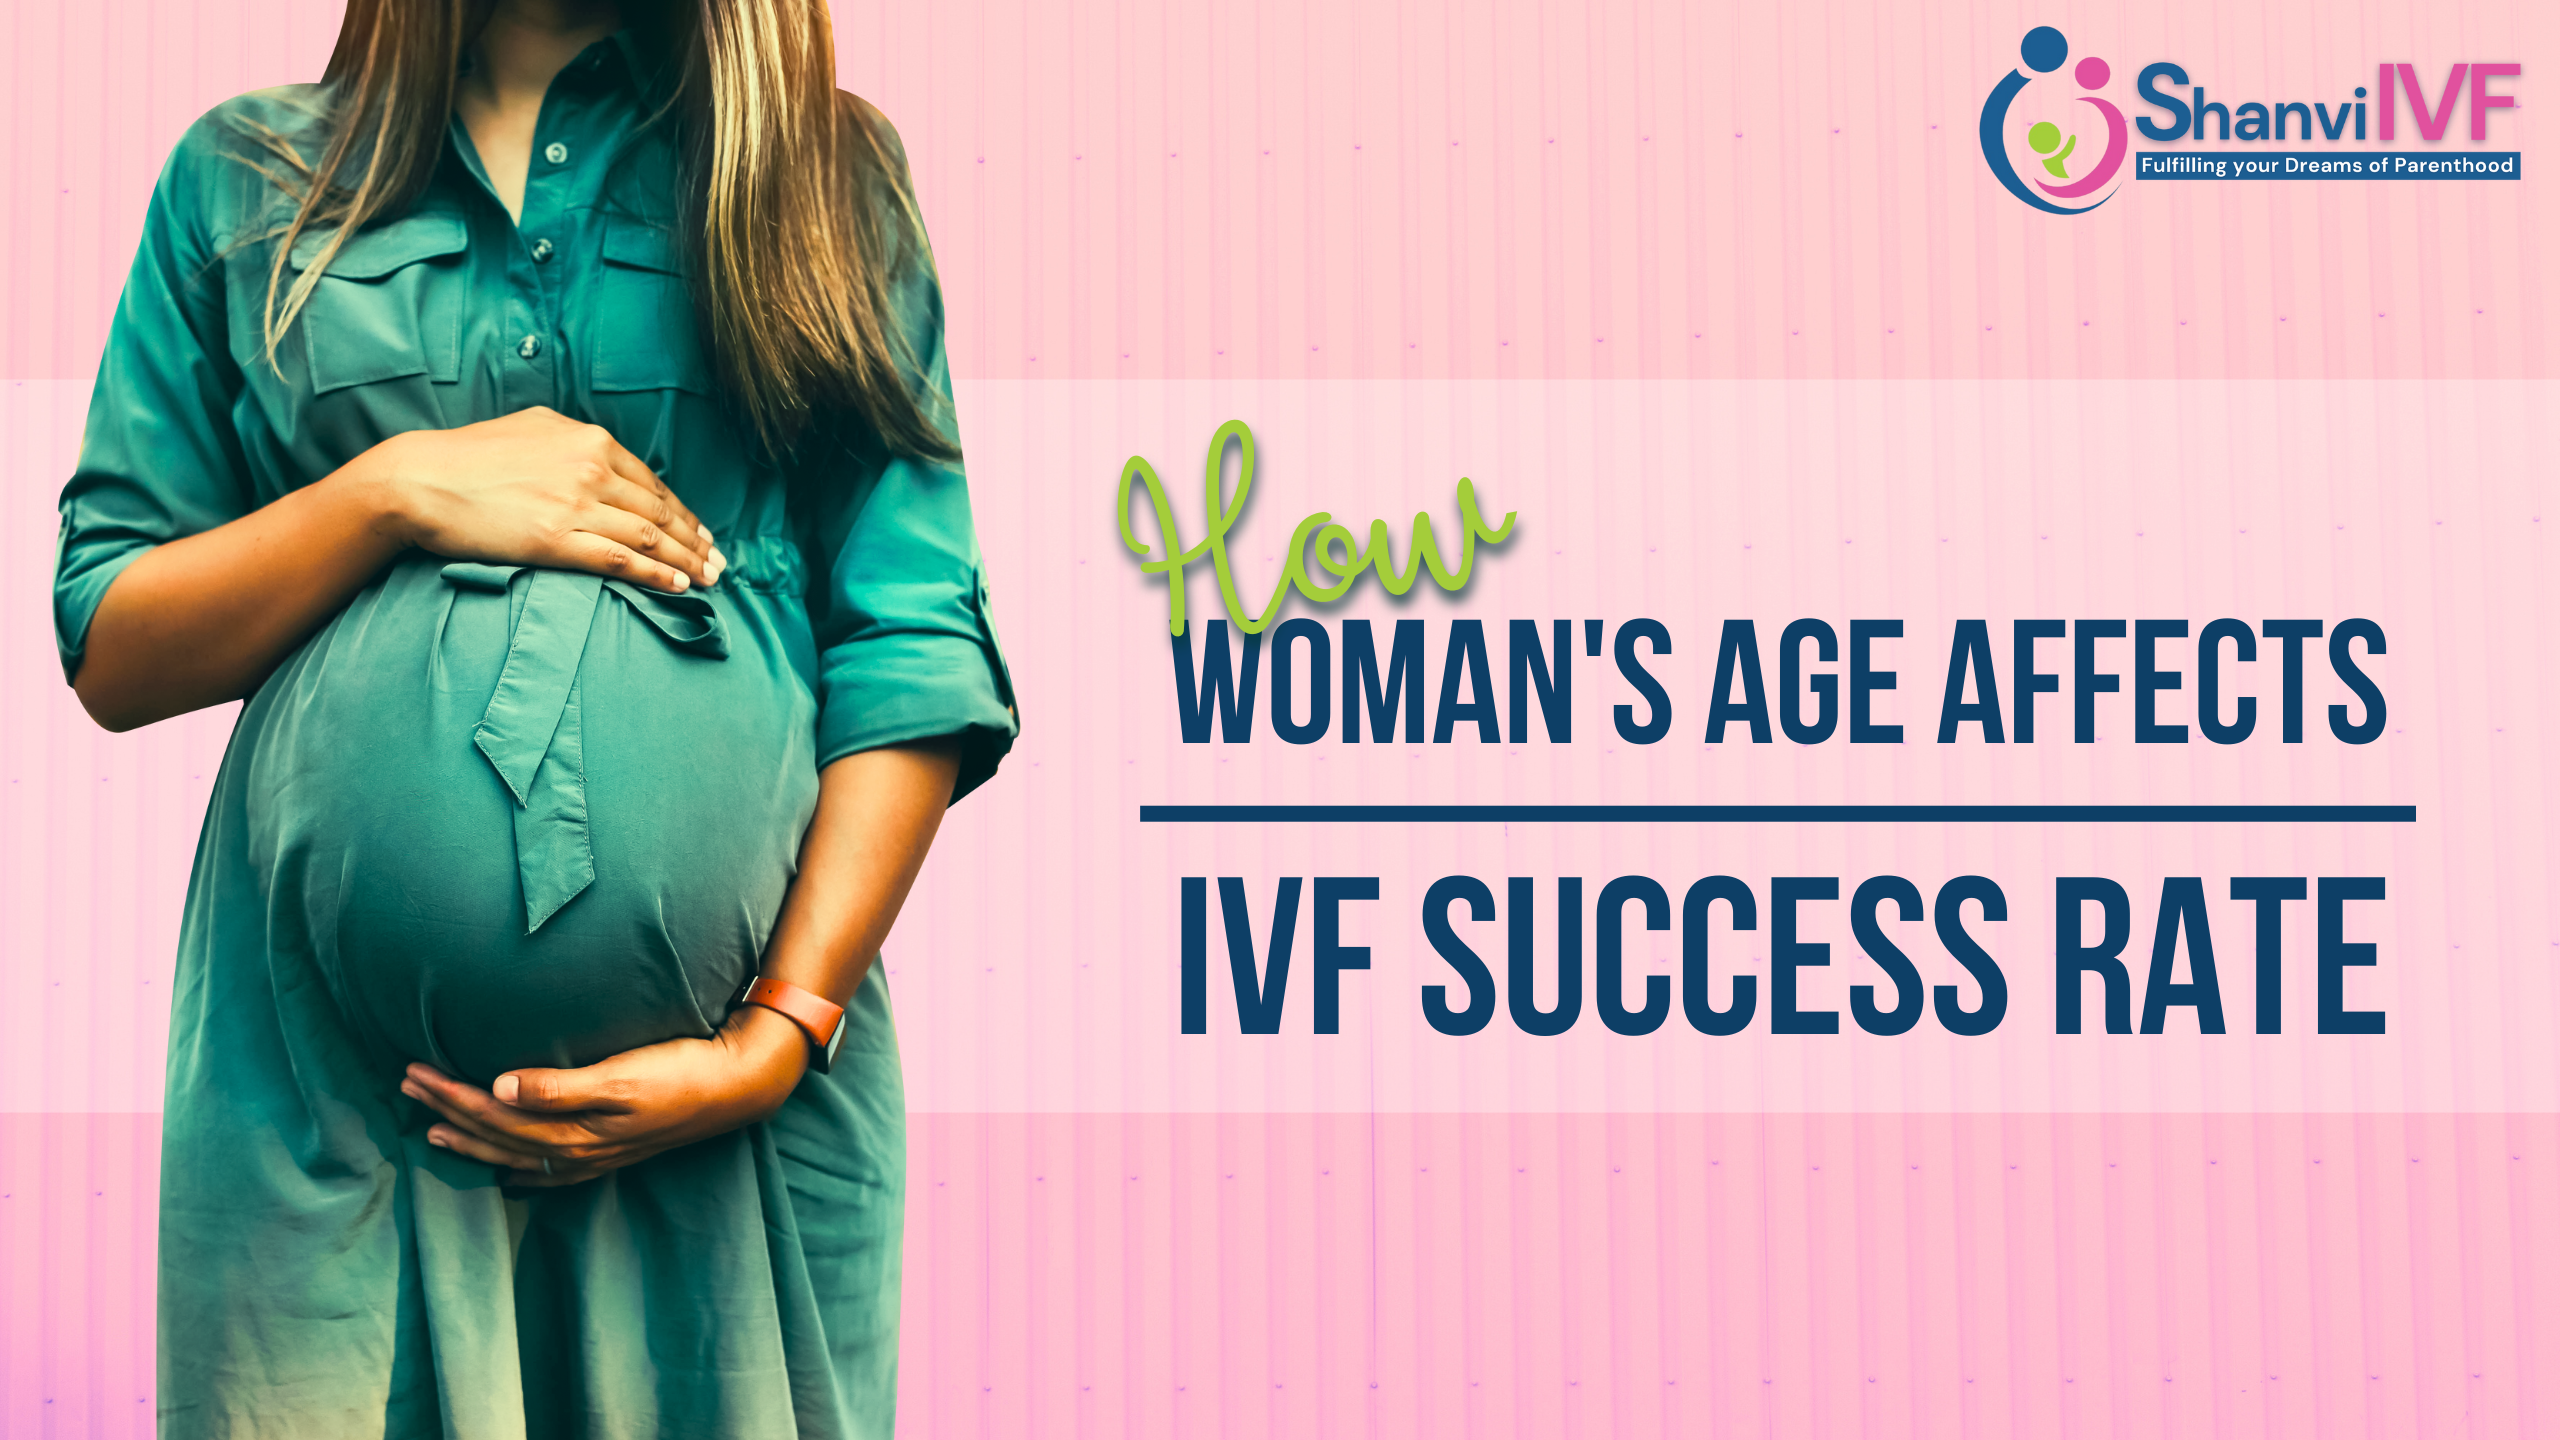 How Women’s Age Affects IVF Success Rate?